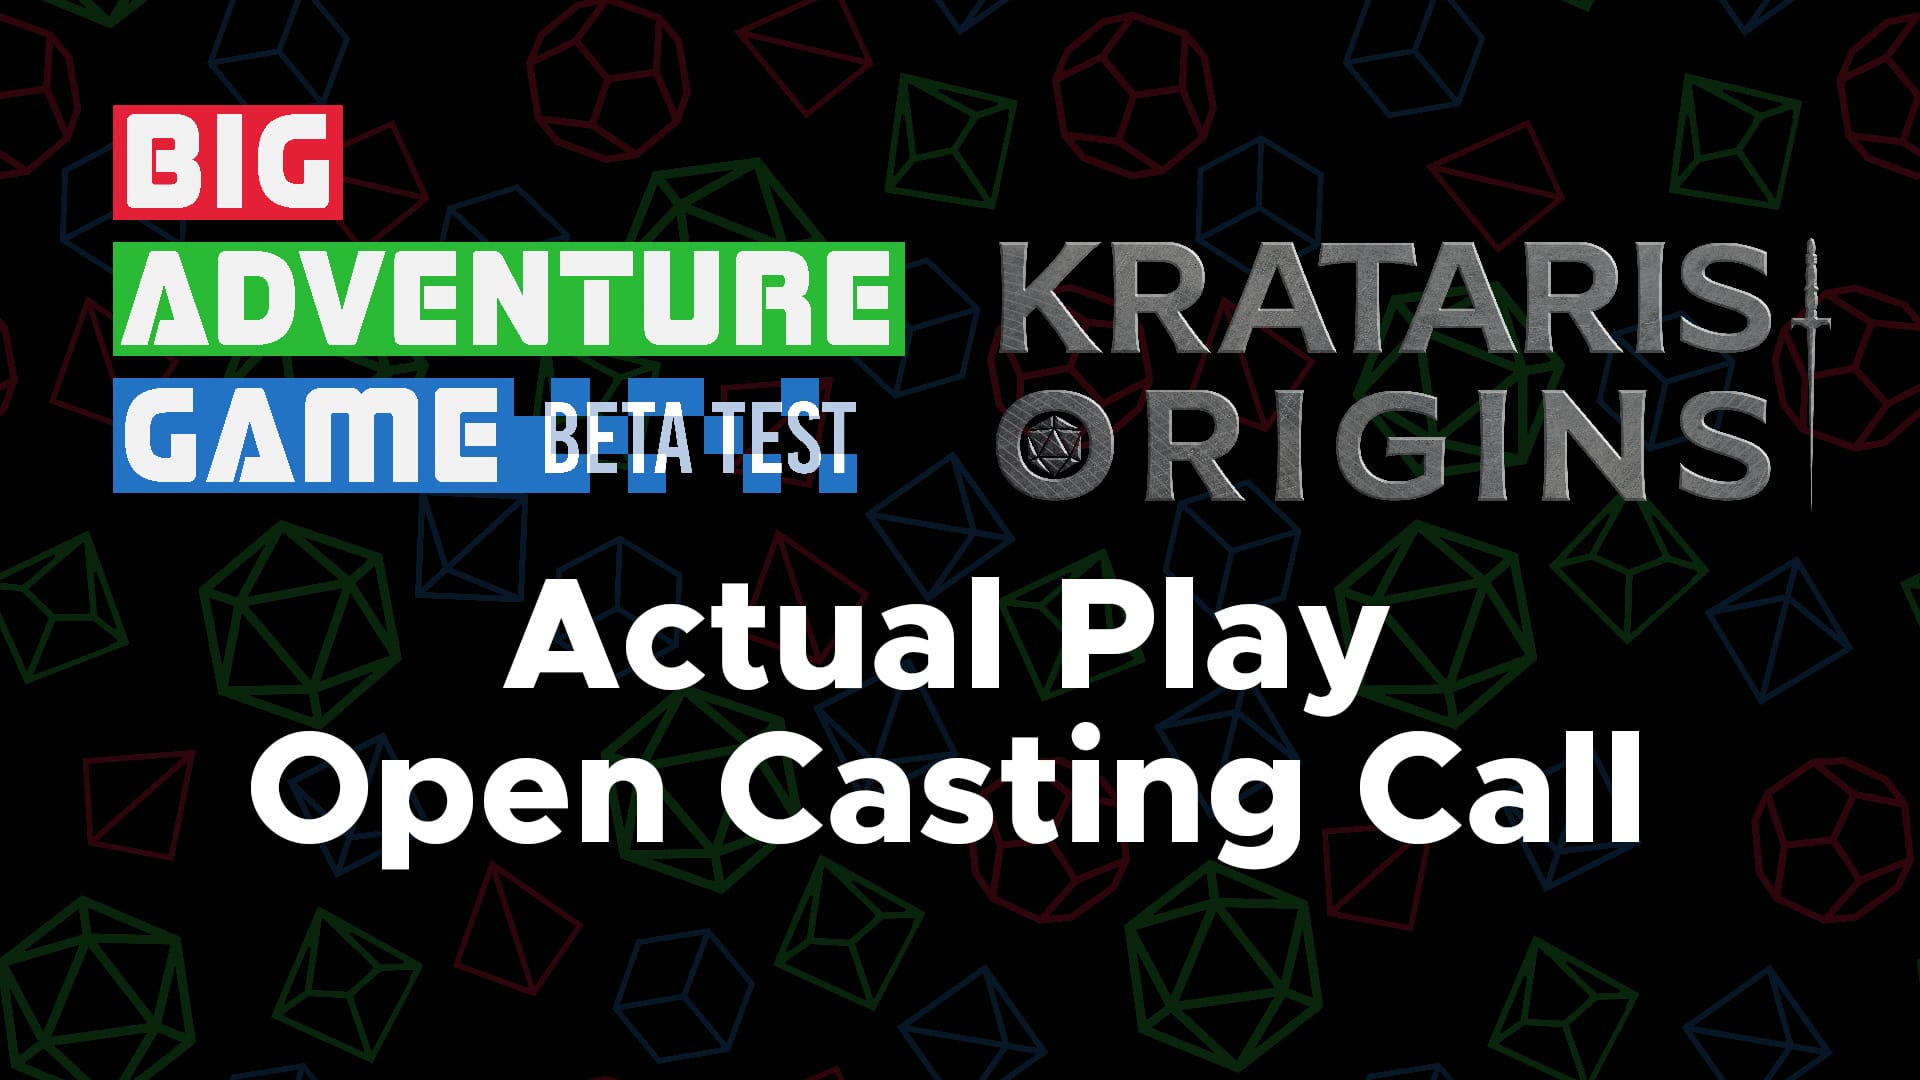 It's an AP, It's a Livestream, It's a Beta Test, It's an Open Casting Call!